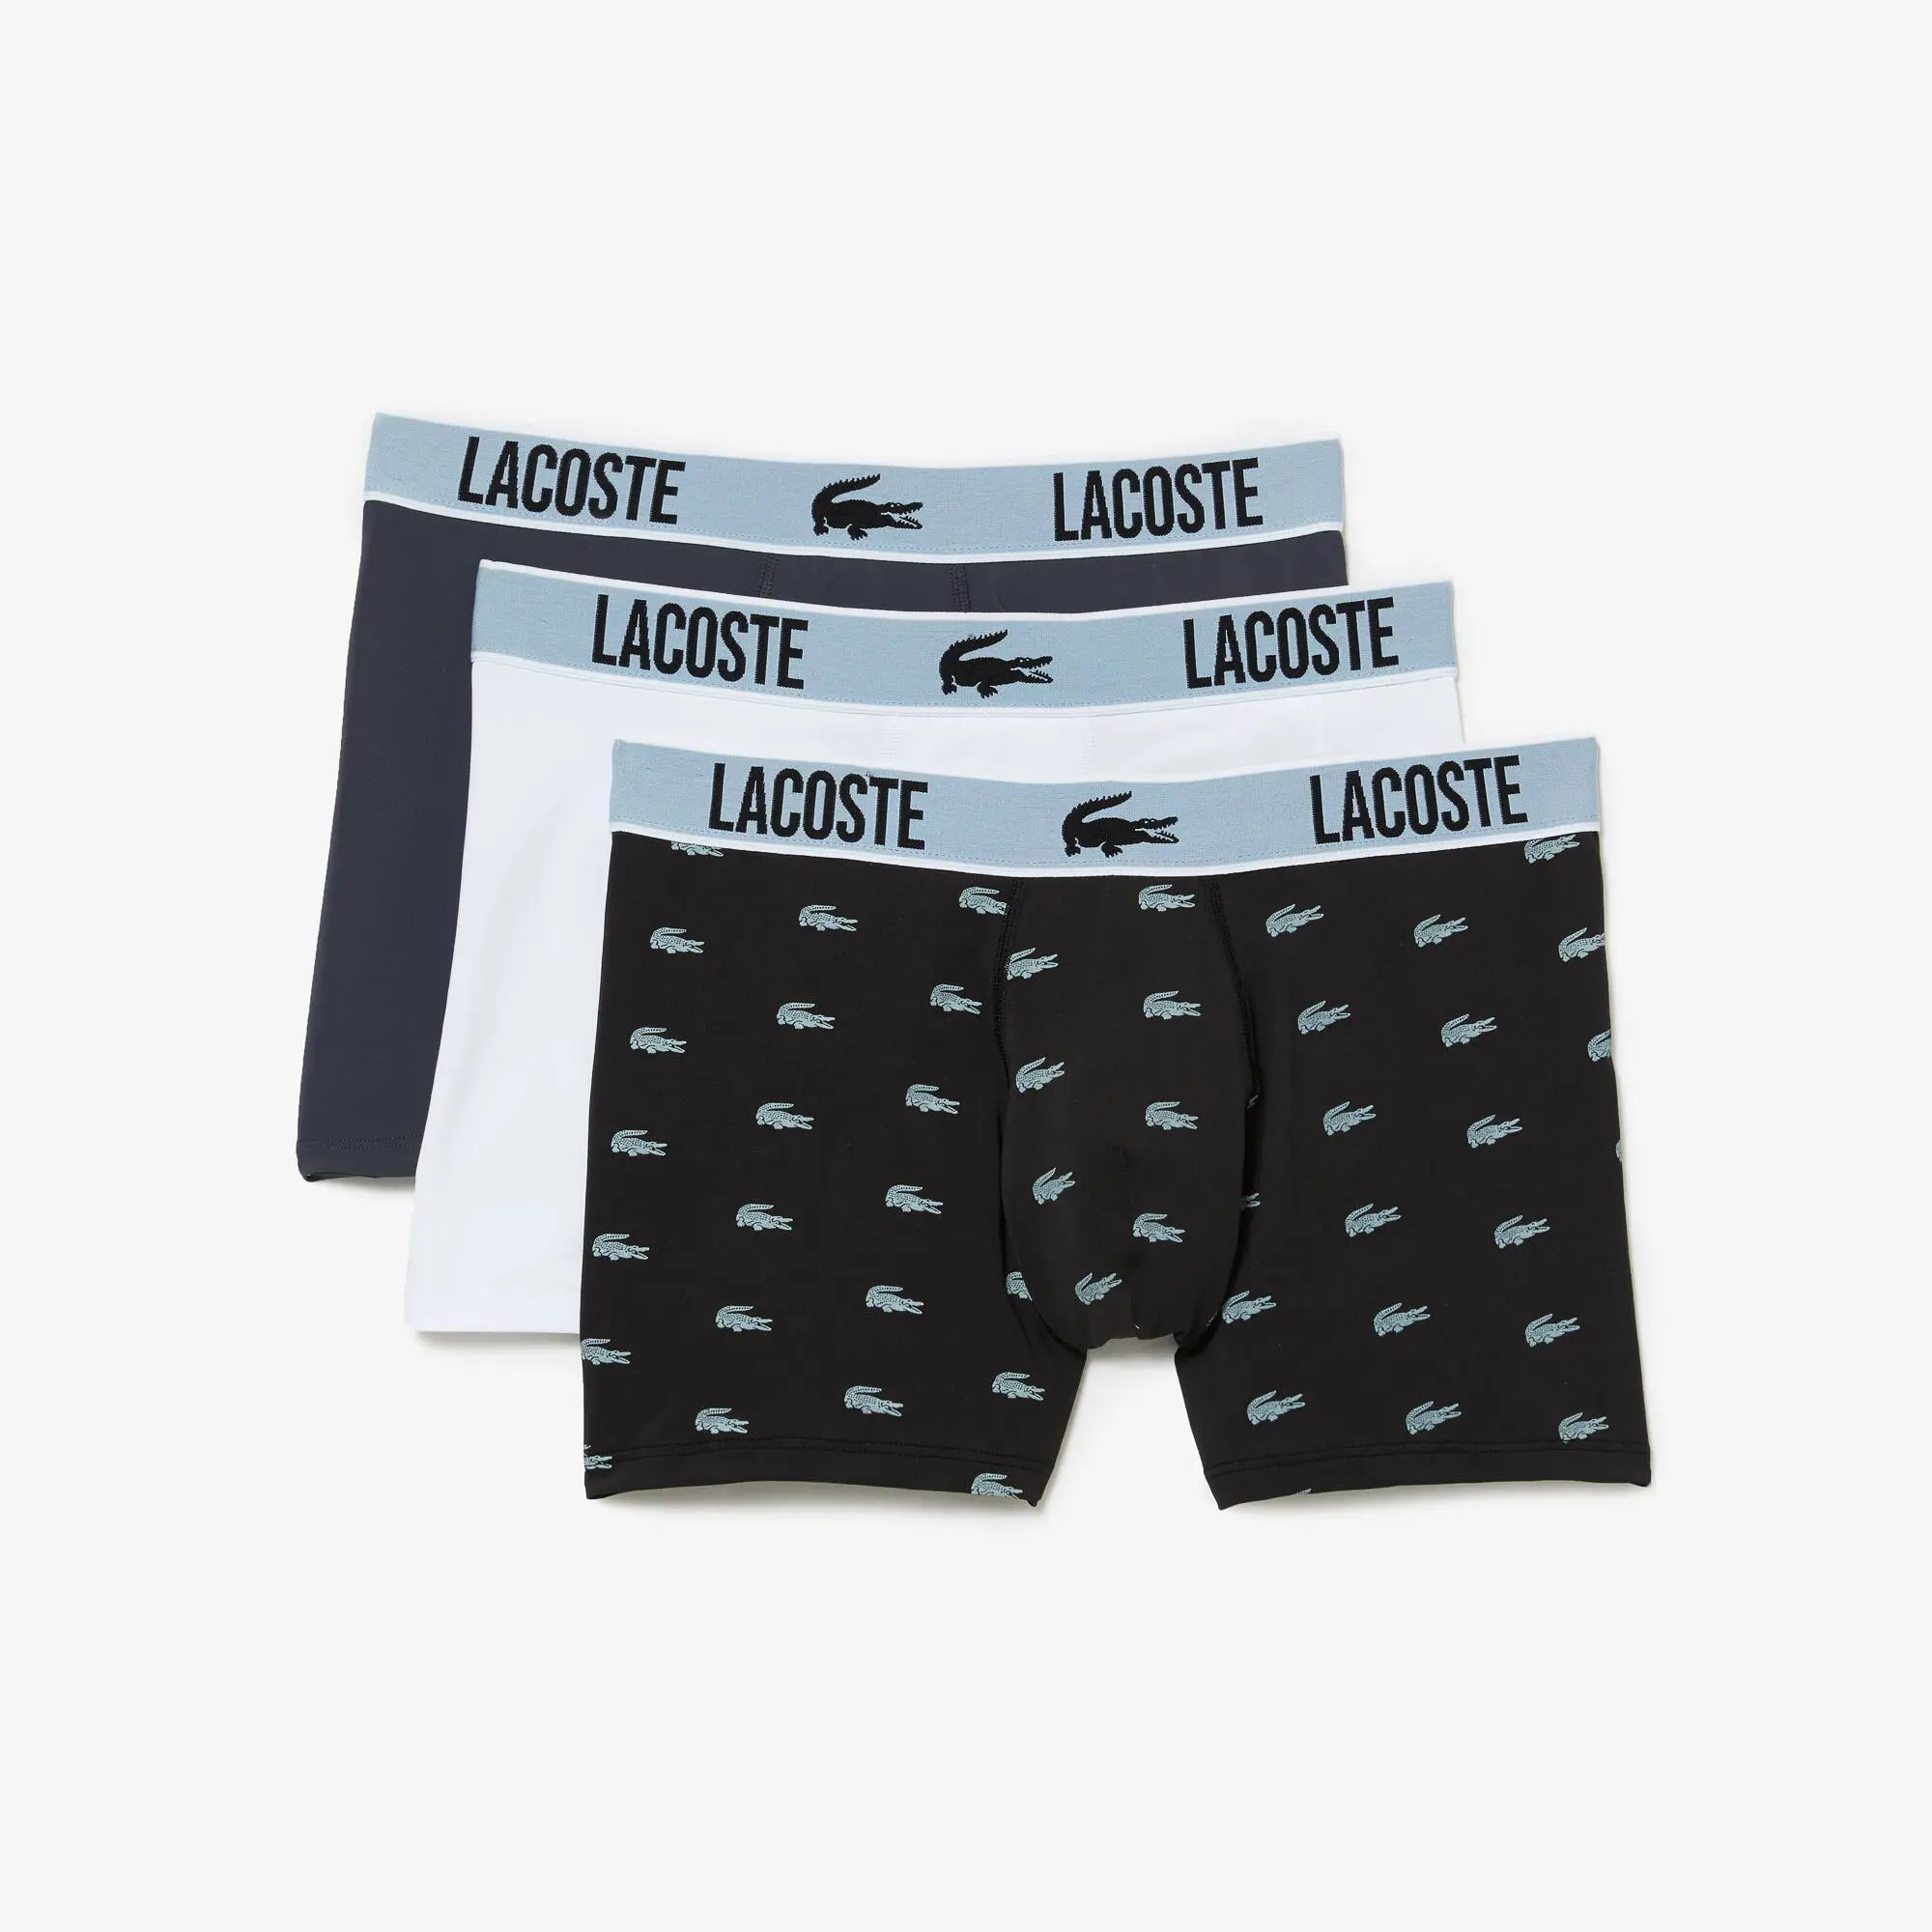 Lacoste Men's Recycled Polyester Jersey Trunk 3-Pack. 2